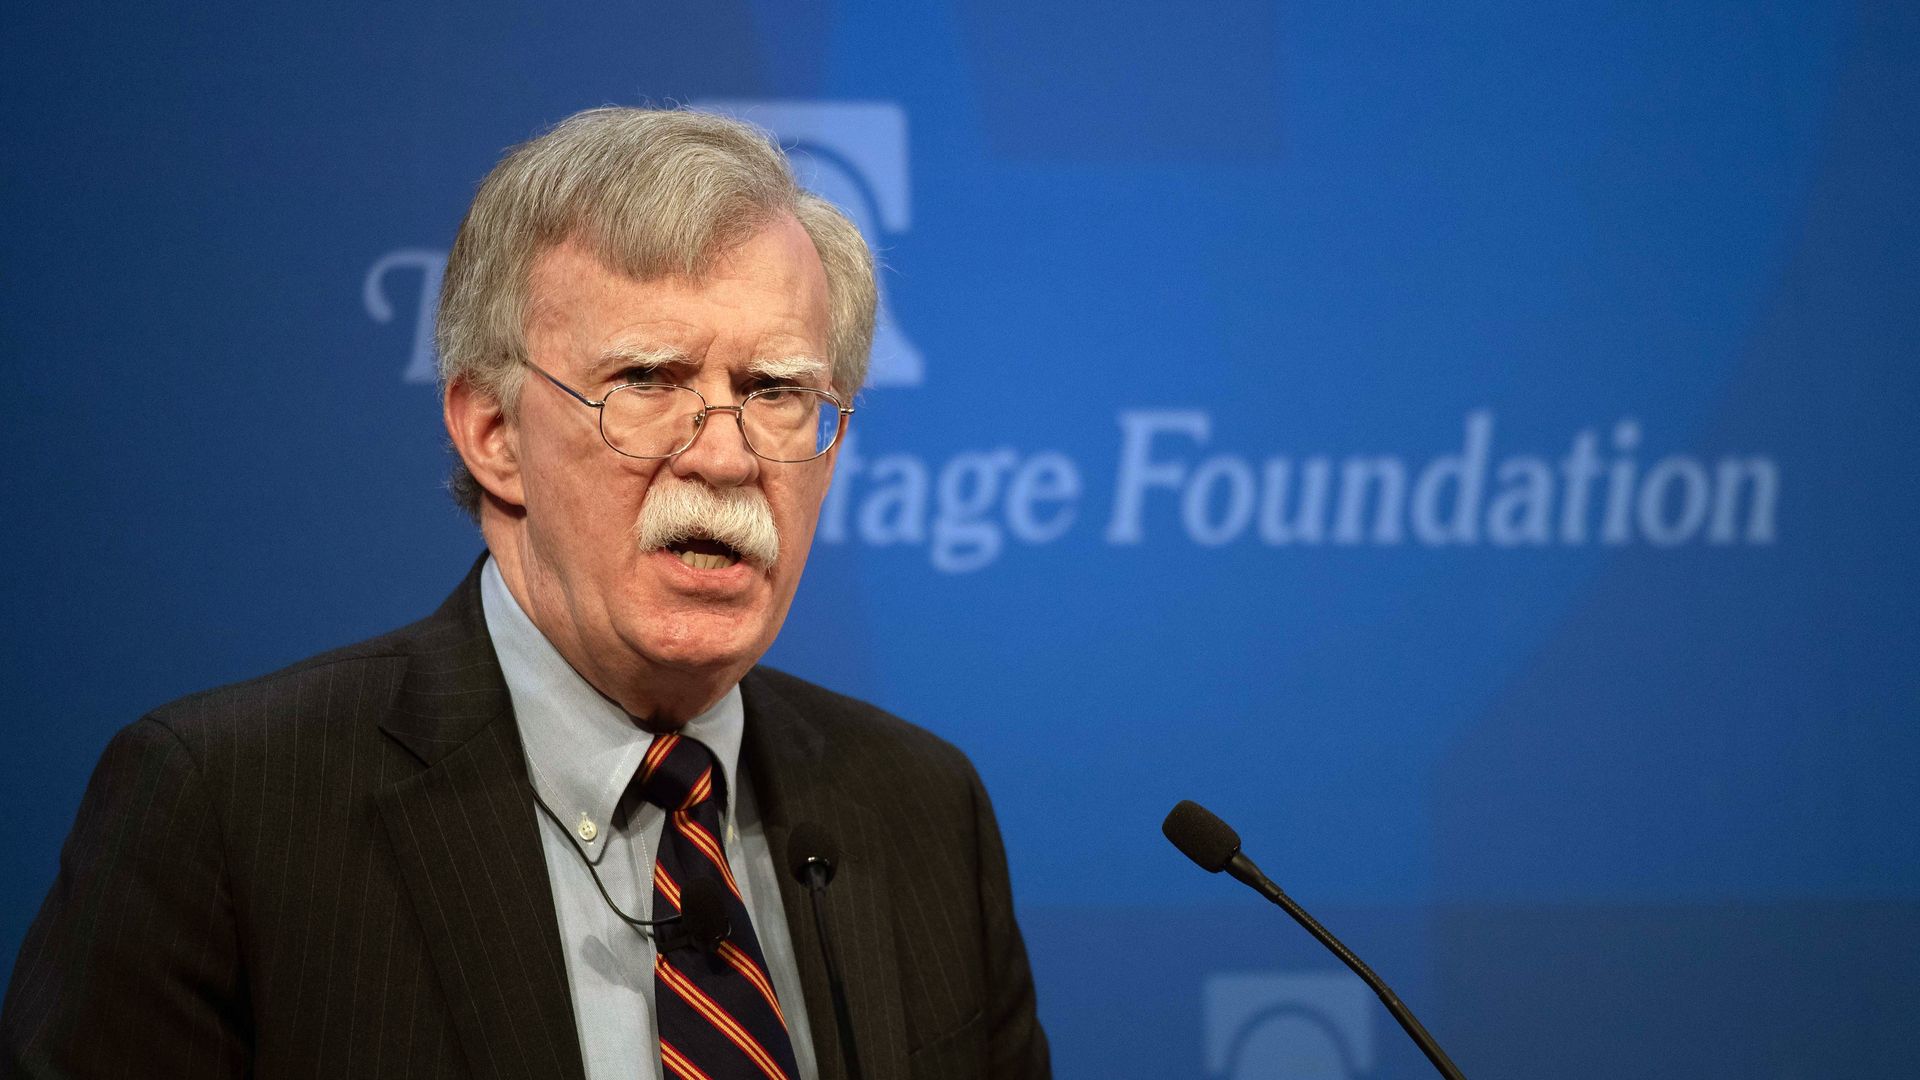 US National Security Advisor John Bolton speaks about the administration's African policy at the Heritage Foundation in Washington, DC